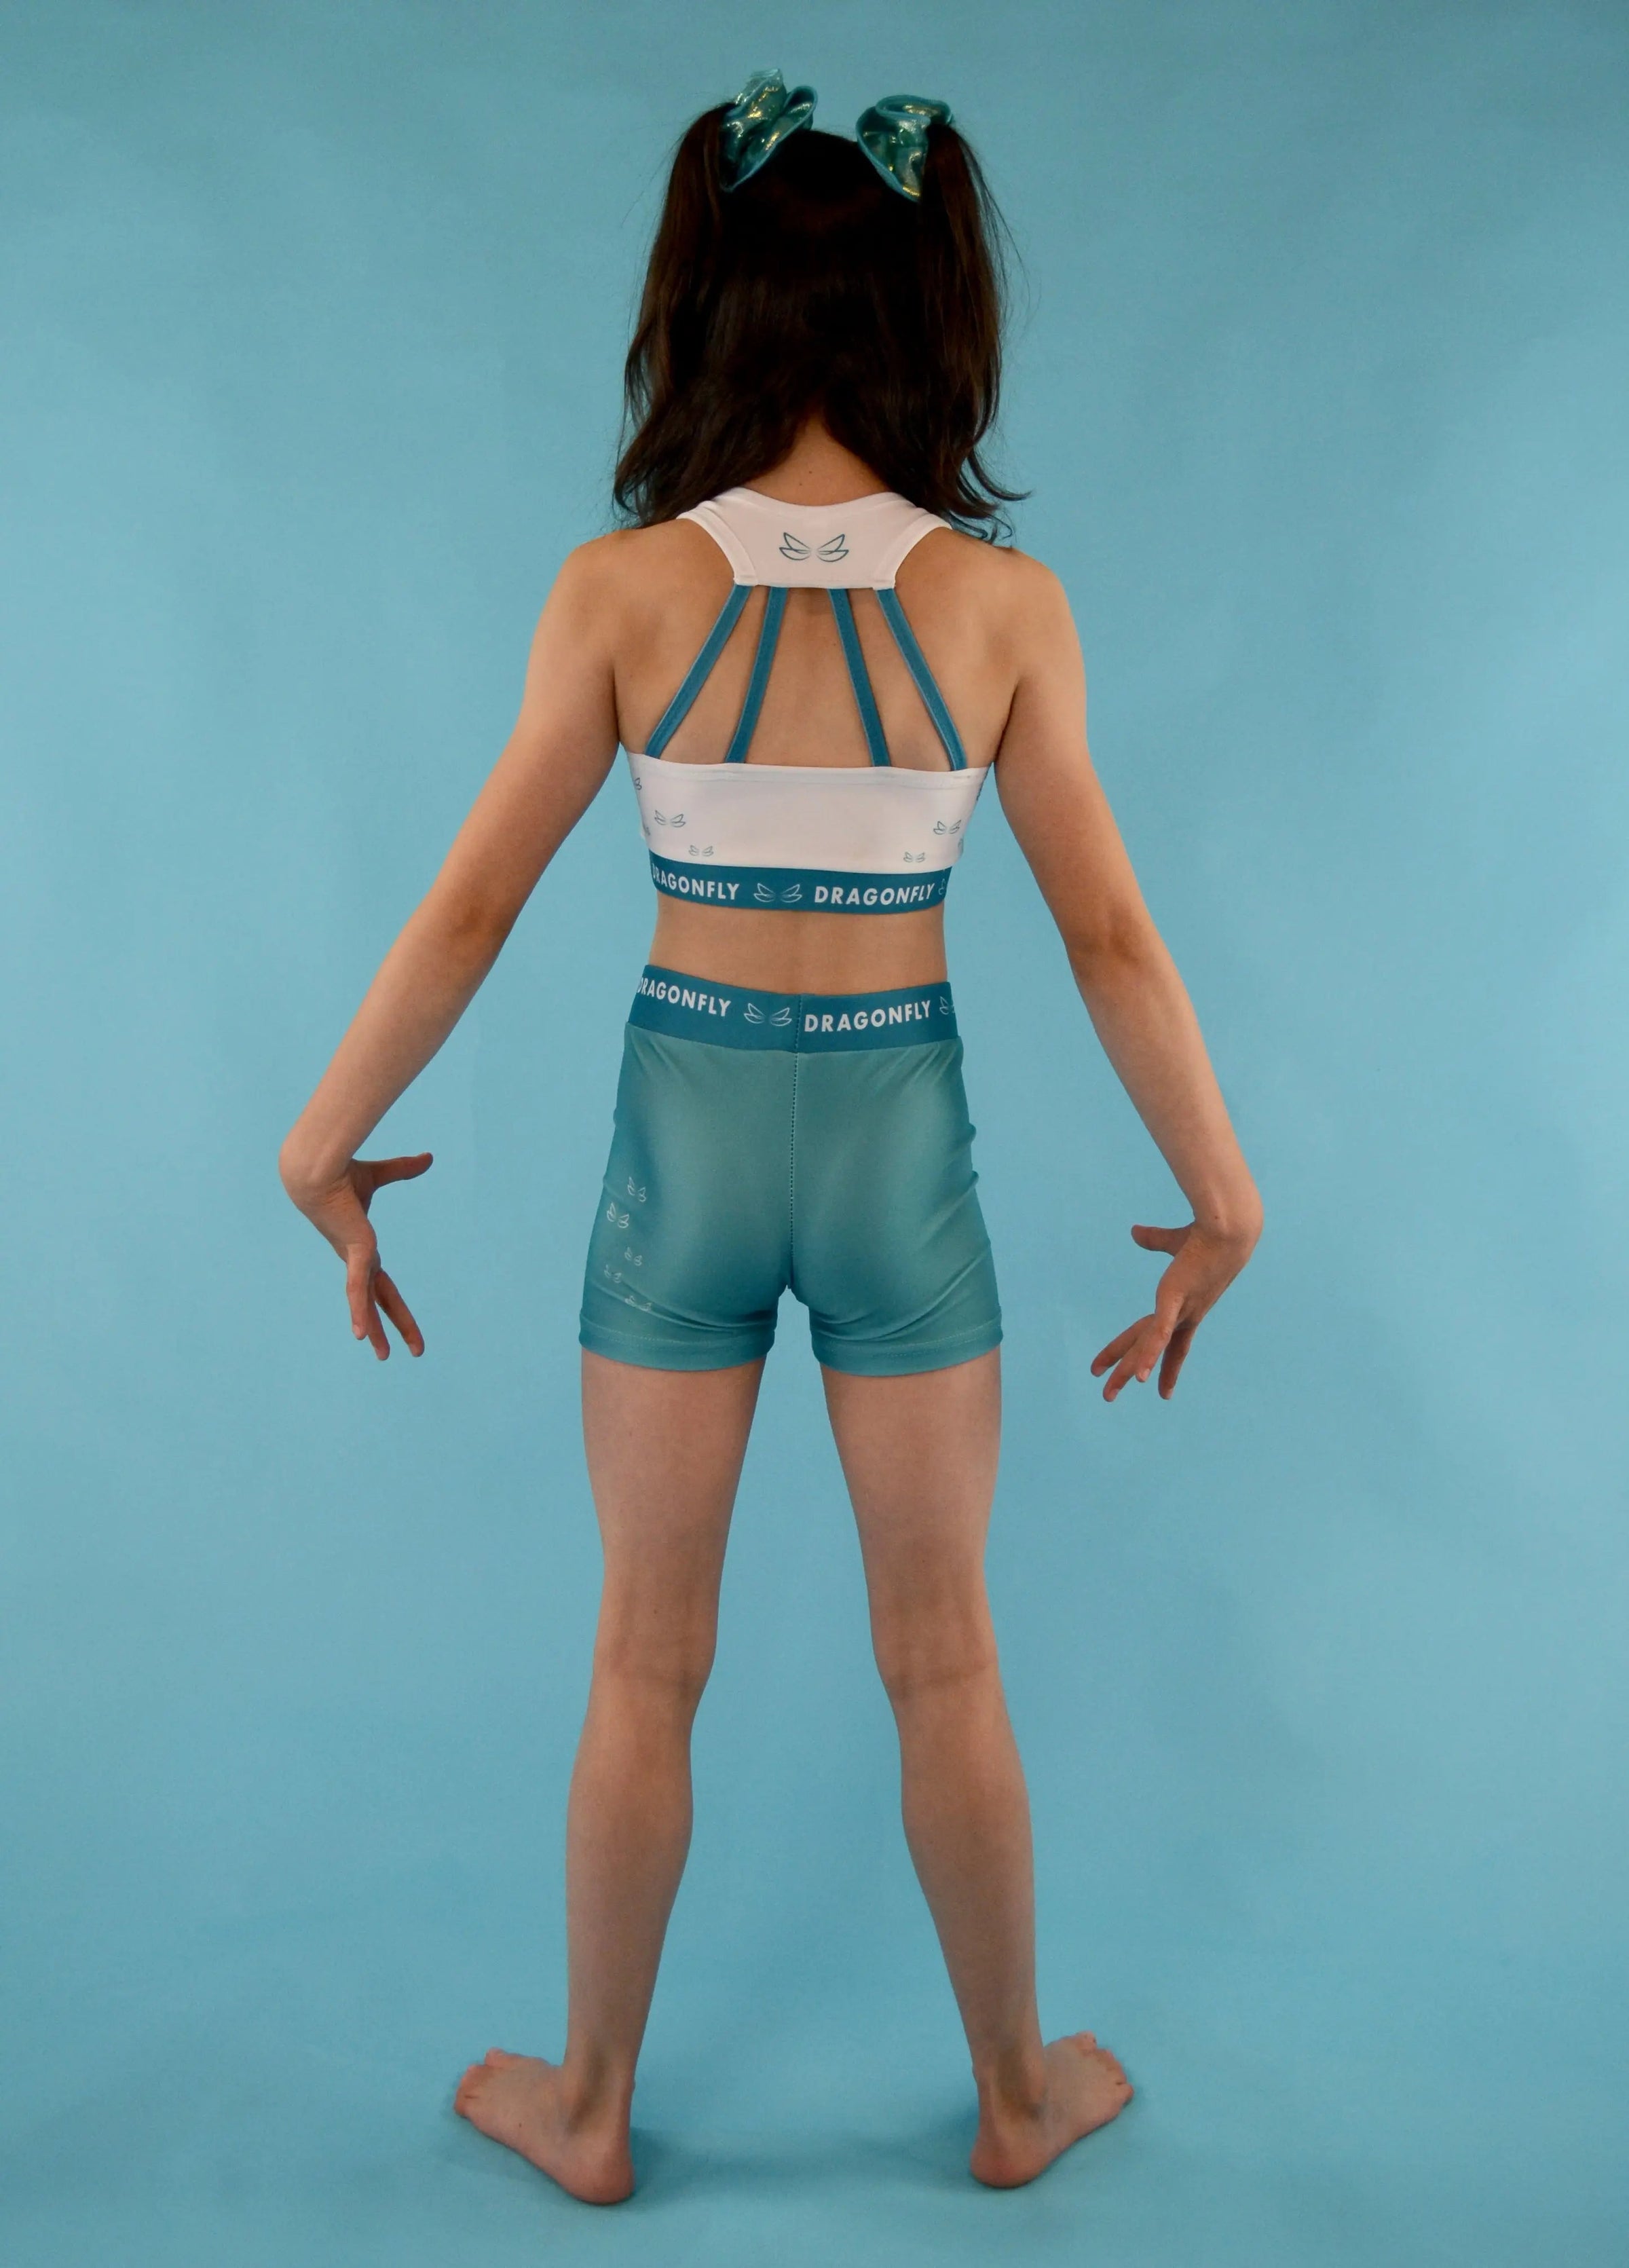 Dragonfly Leotards, White & Teal Fly High Crop Top